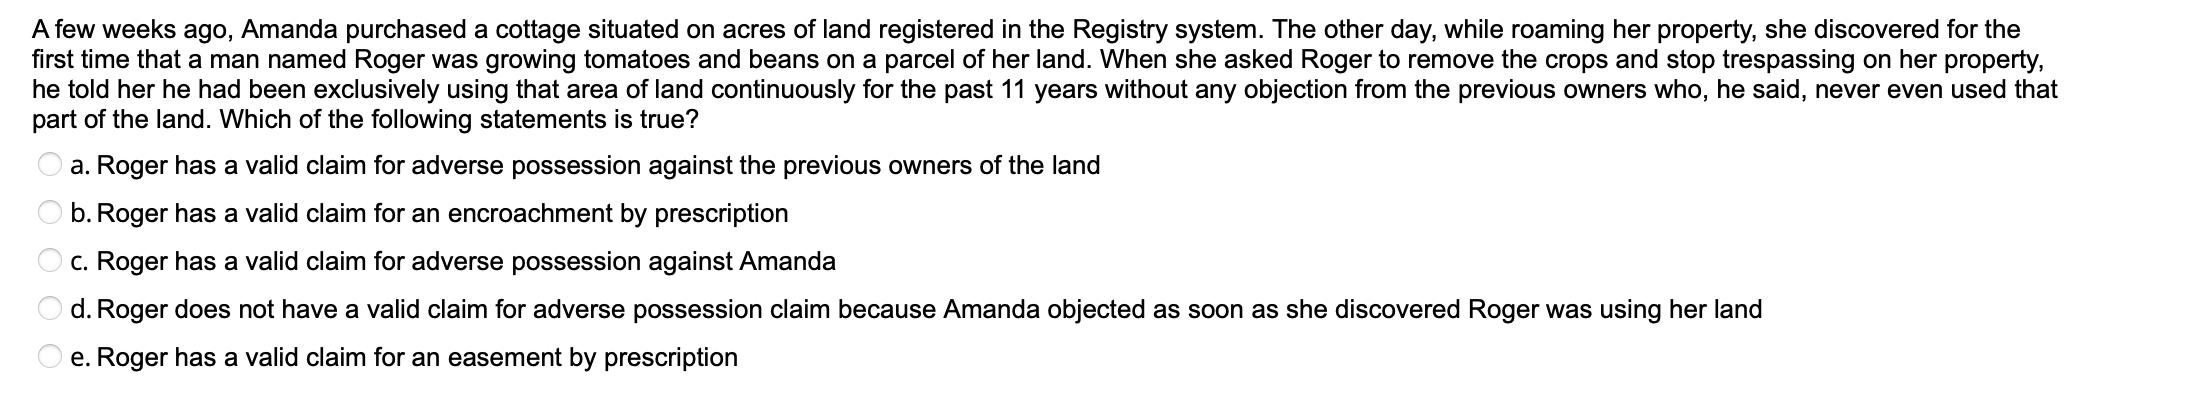 A few weeks ago, Amanda purchased a cottage situated on acres of land registered in the Registry system. The